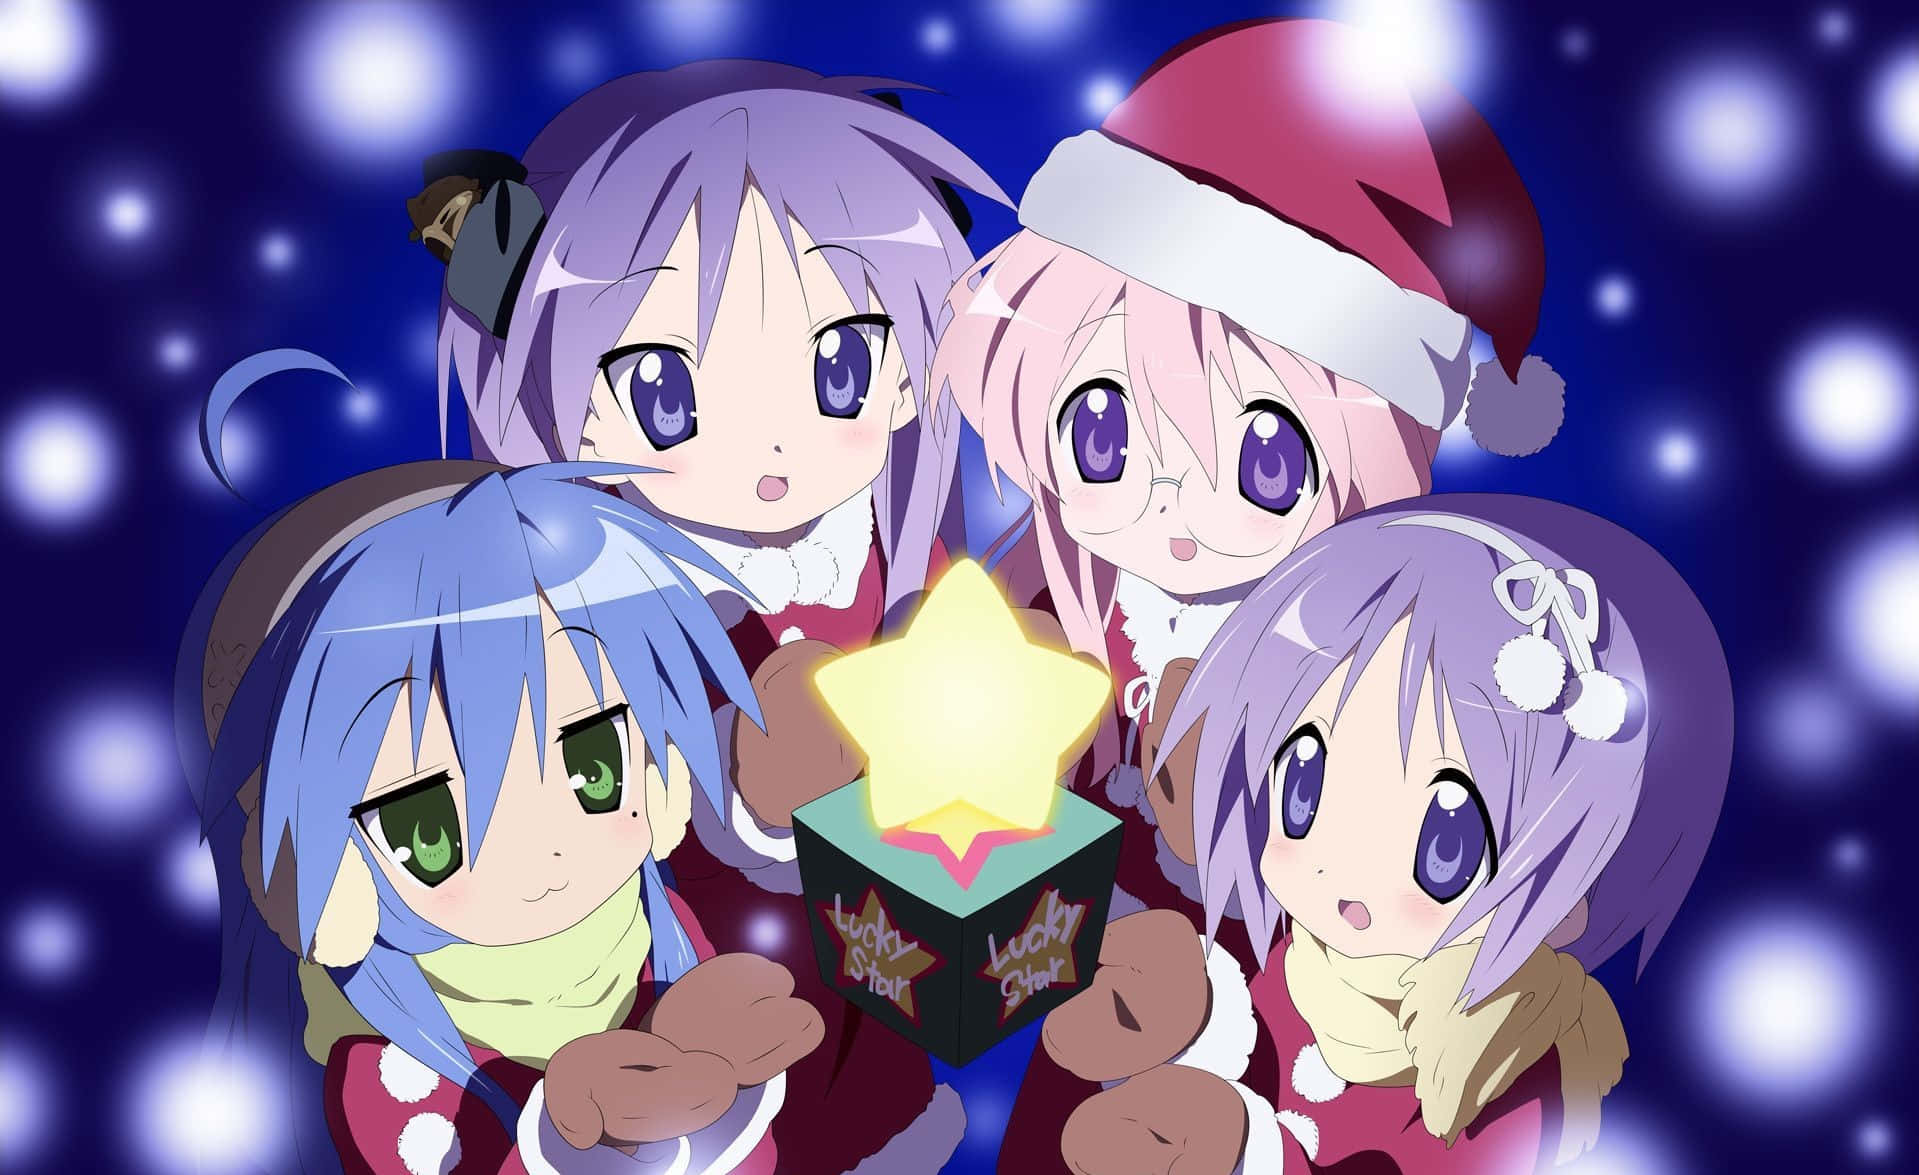 Celebrate Christmas with your favorite Anime characters